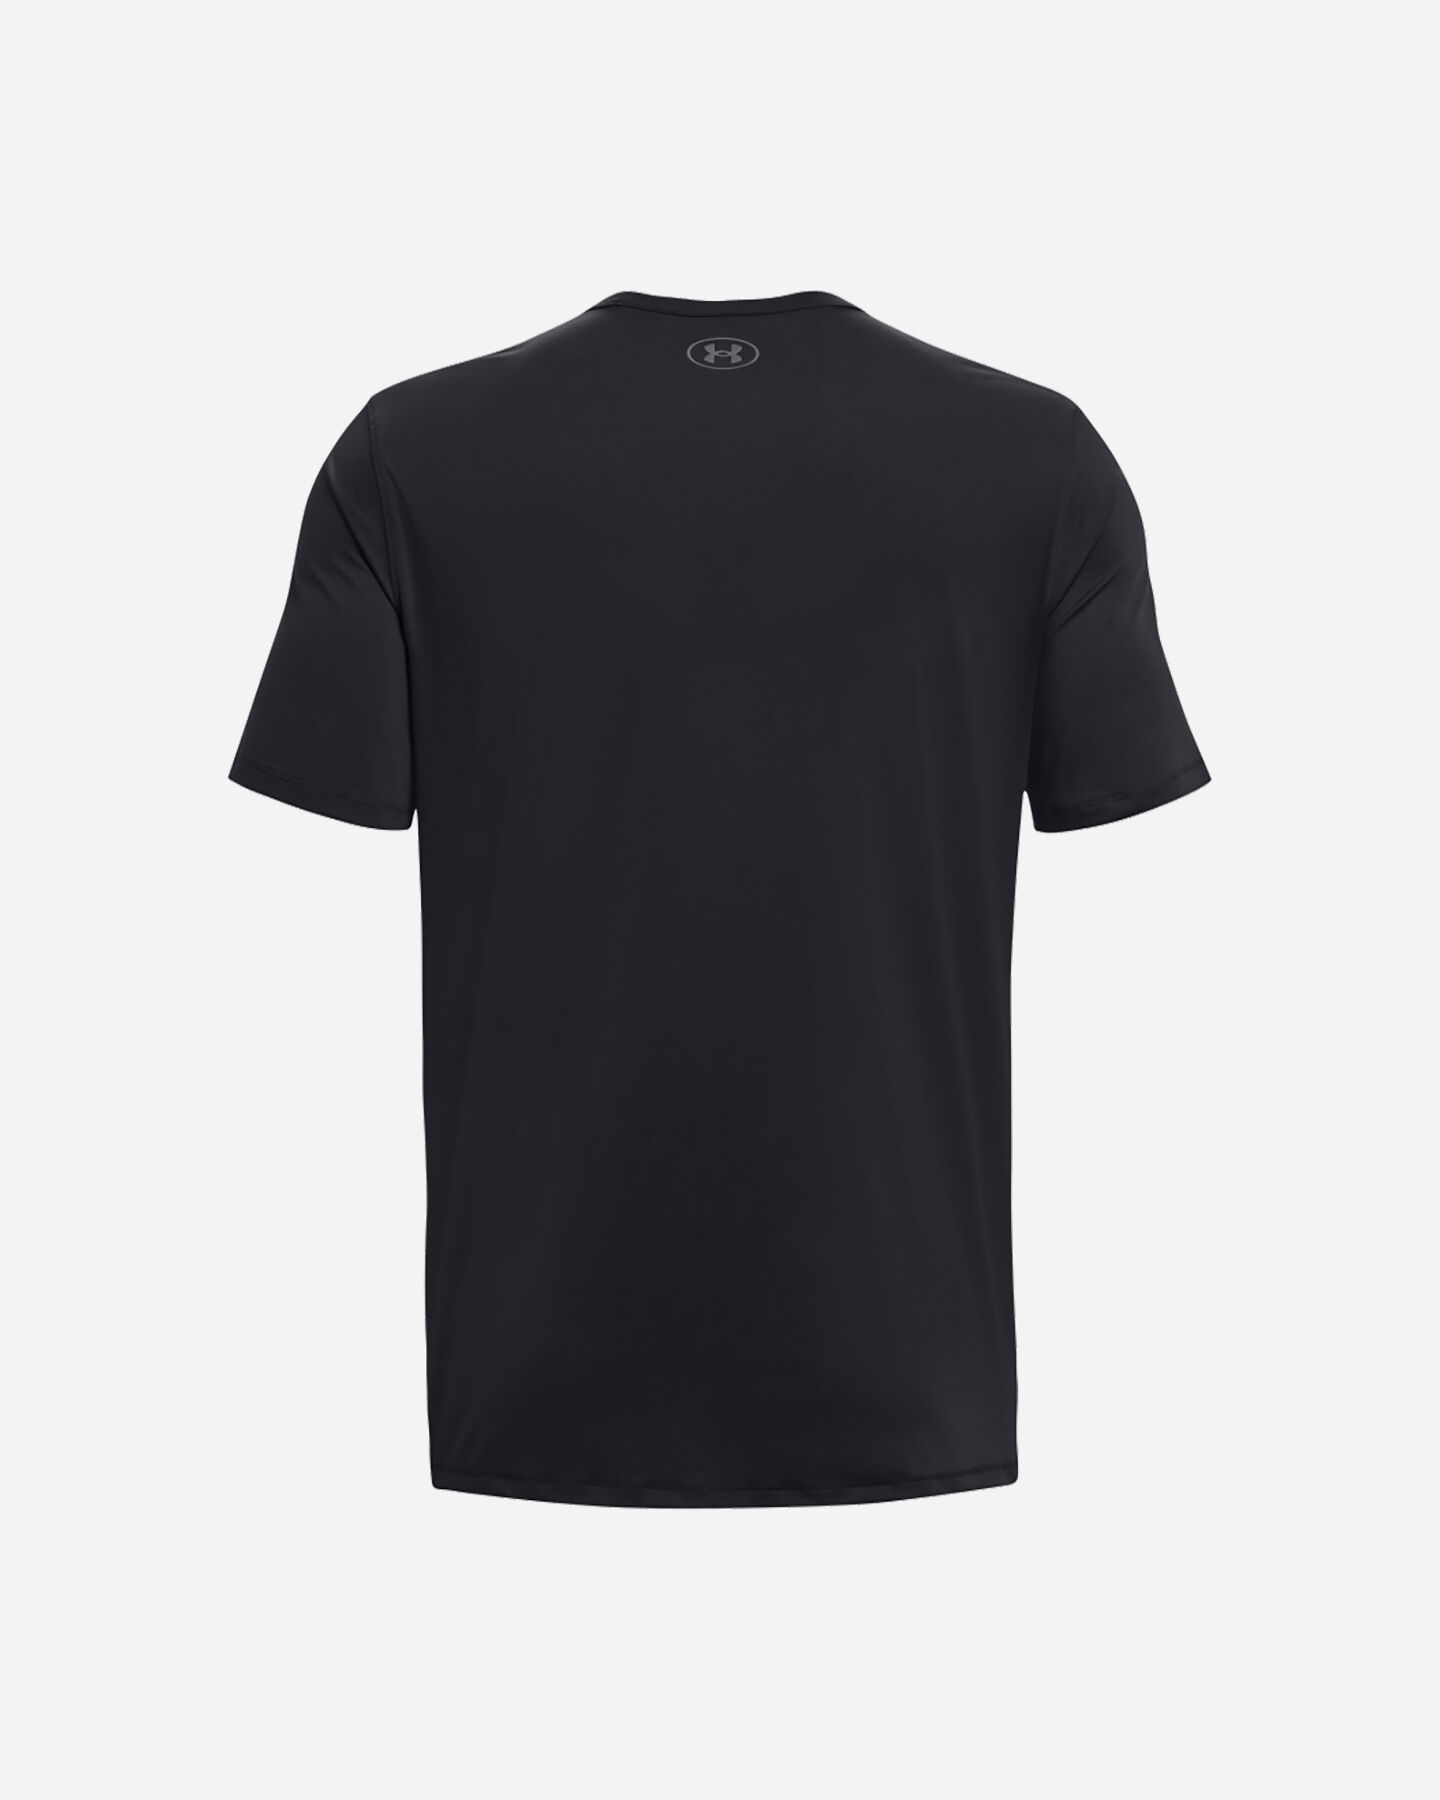  T-Shirt training UNDER ARMOUR MOTION M S5579940|0001|XS scatto 1